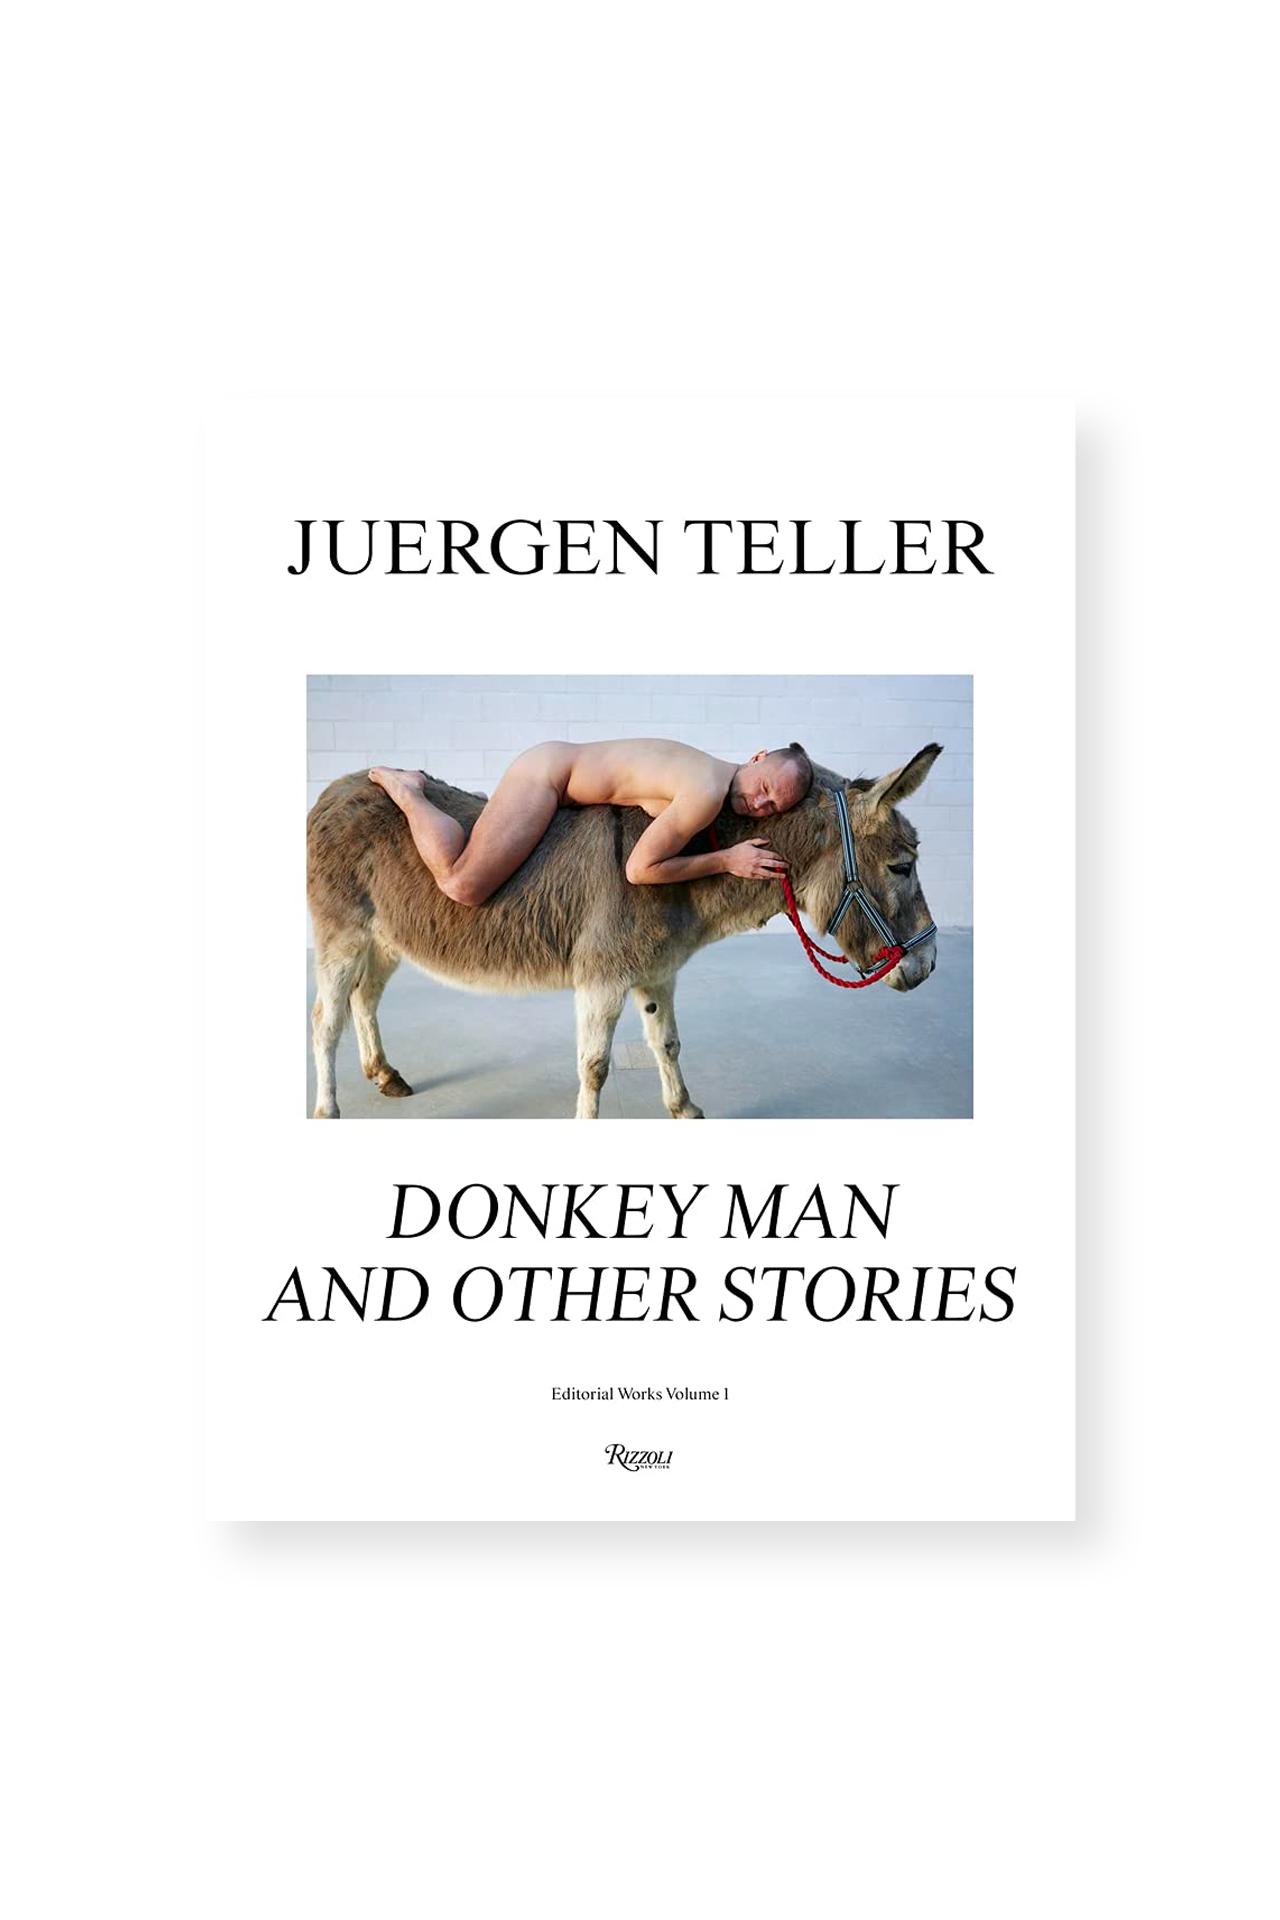 Juergen Teller: Donkey Man and Other Stories (6642900303987)